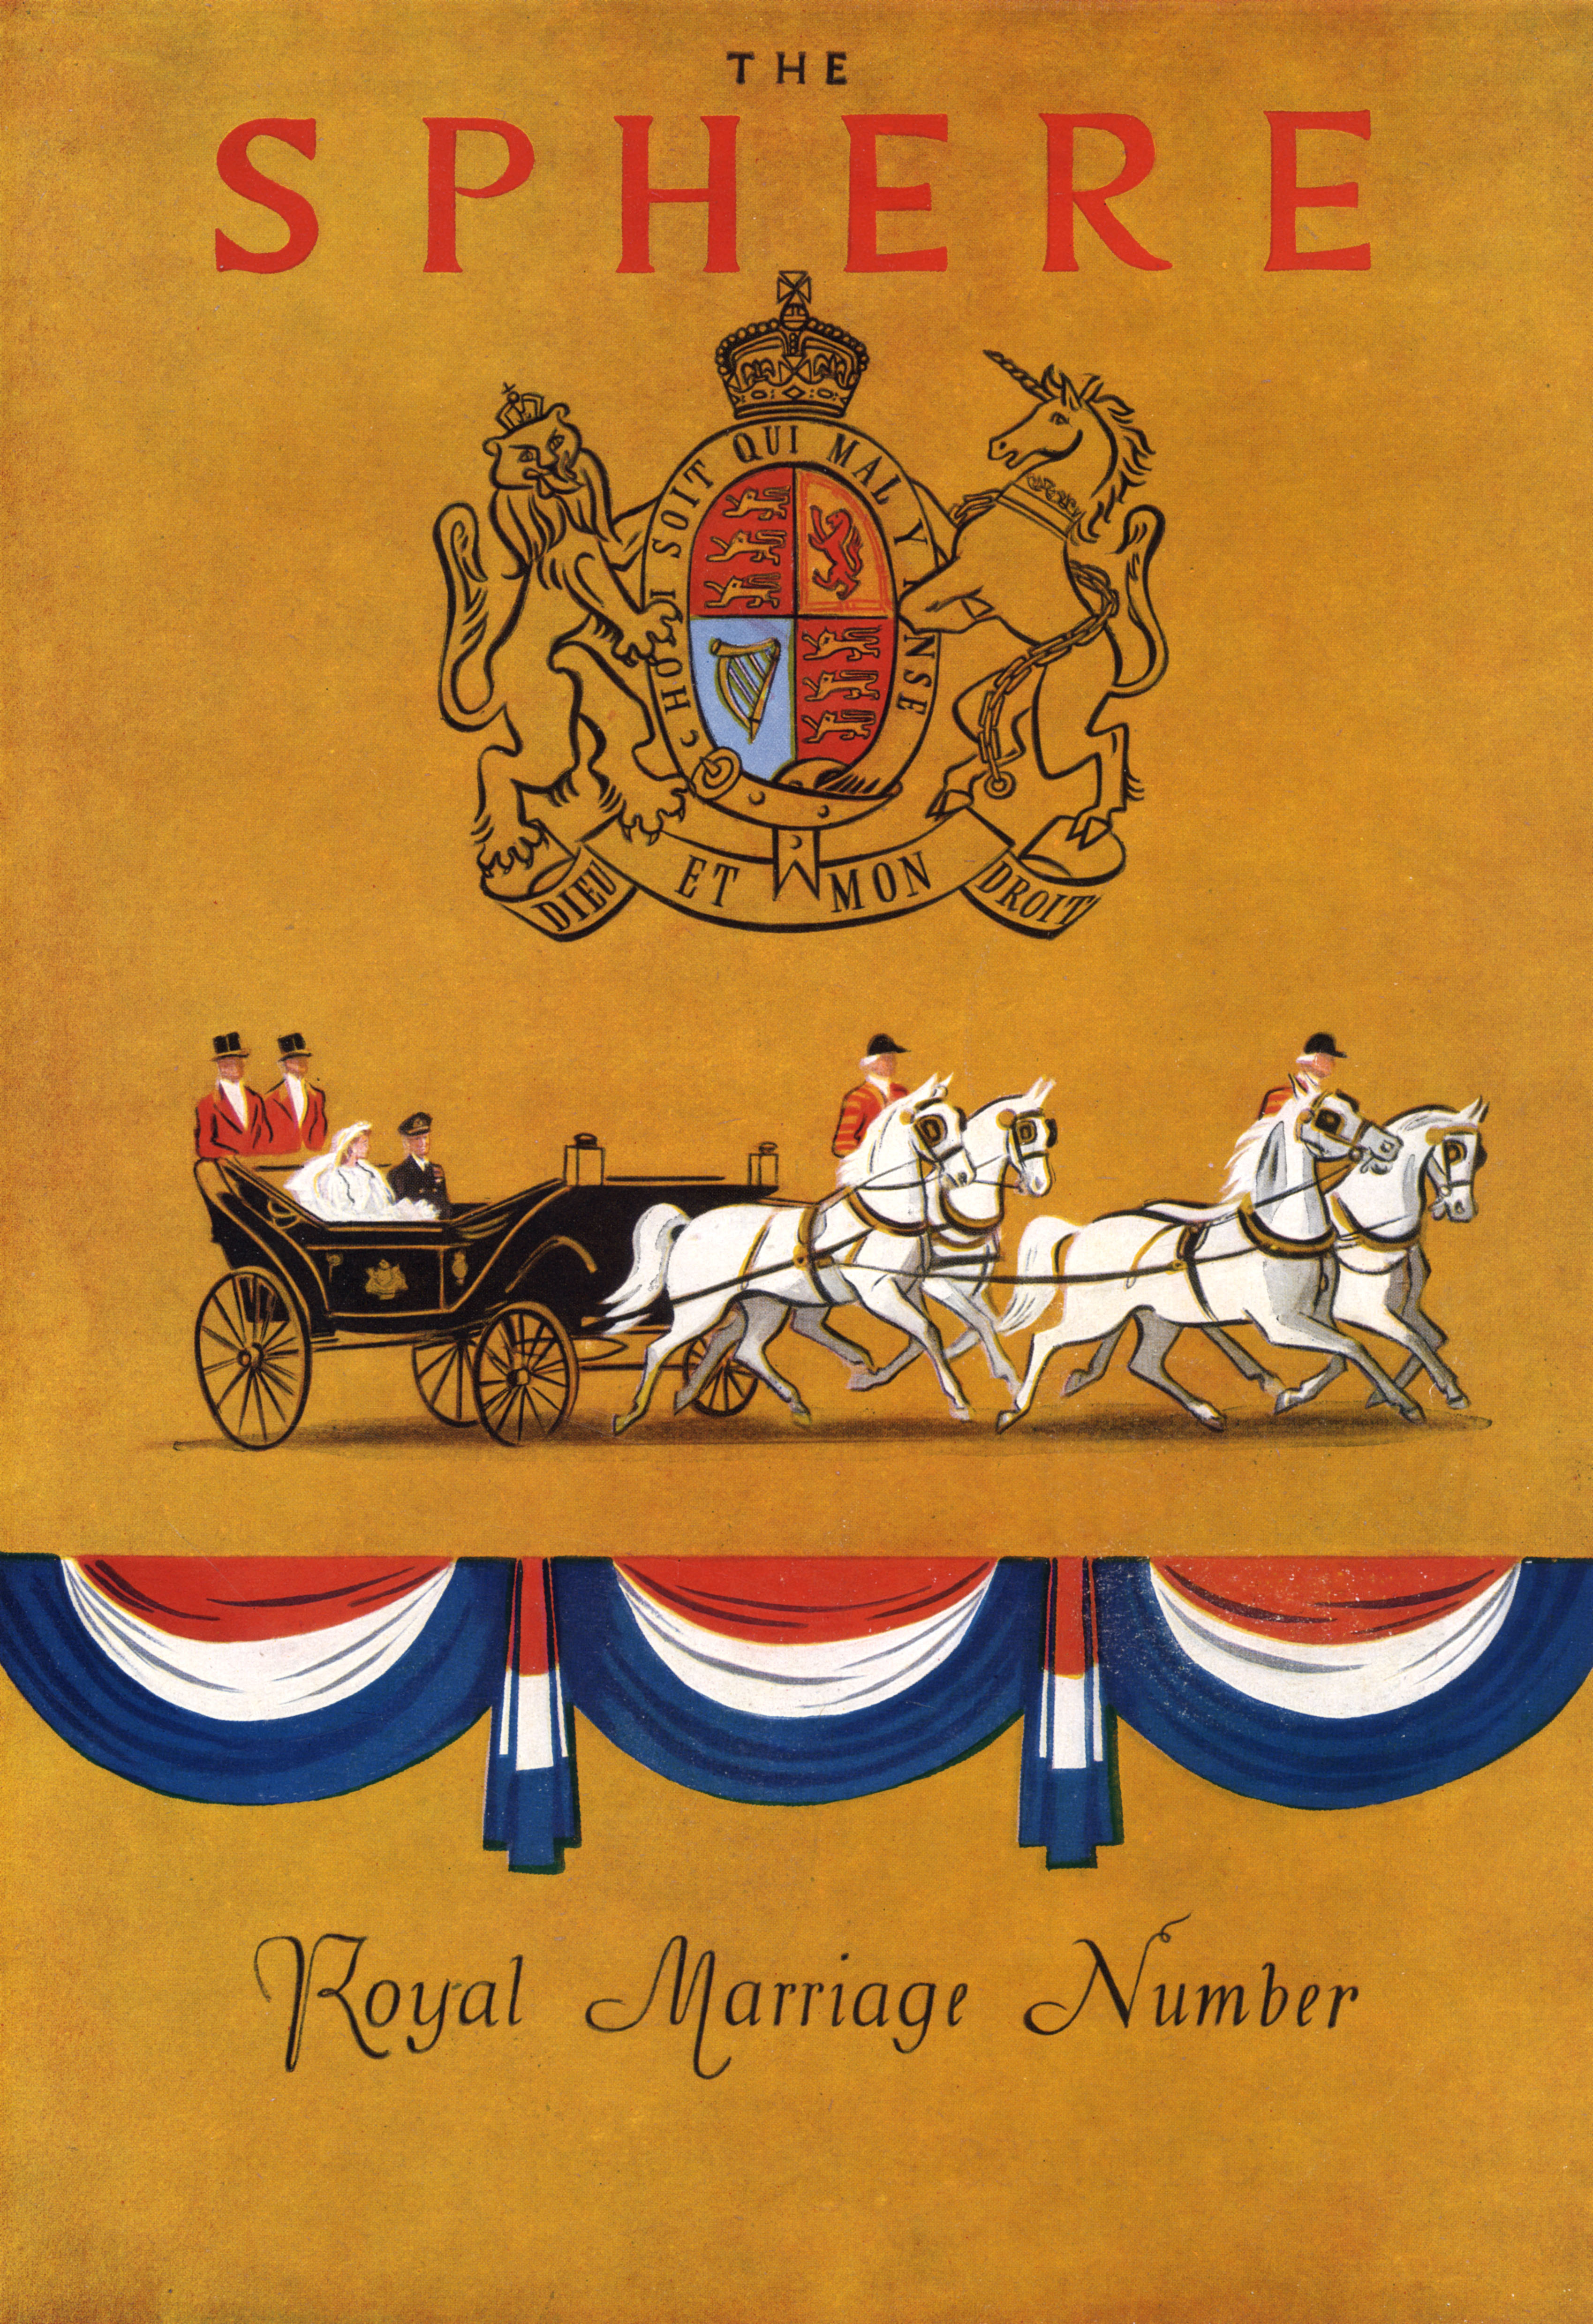 First Anniversary The Queen’s Death - The cover of The Sphere royal marriage number